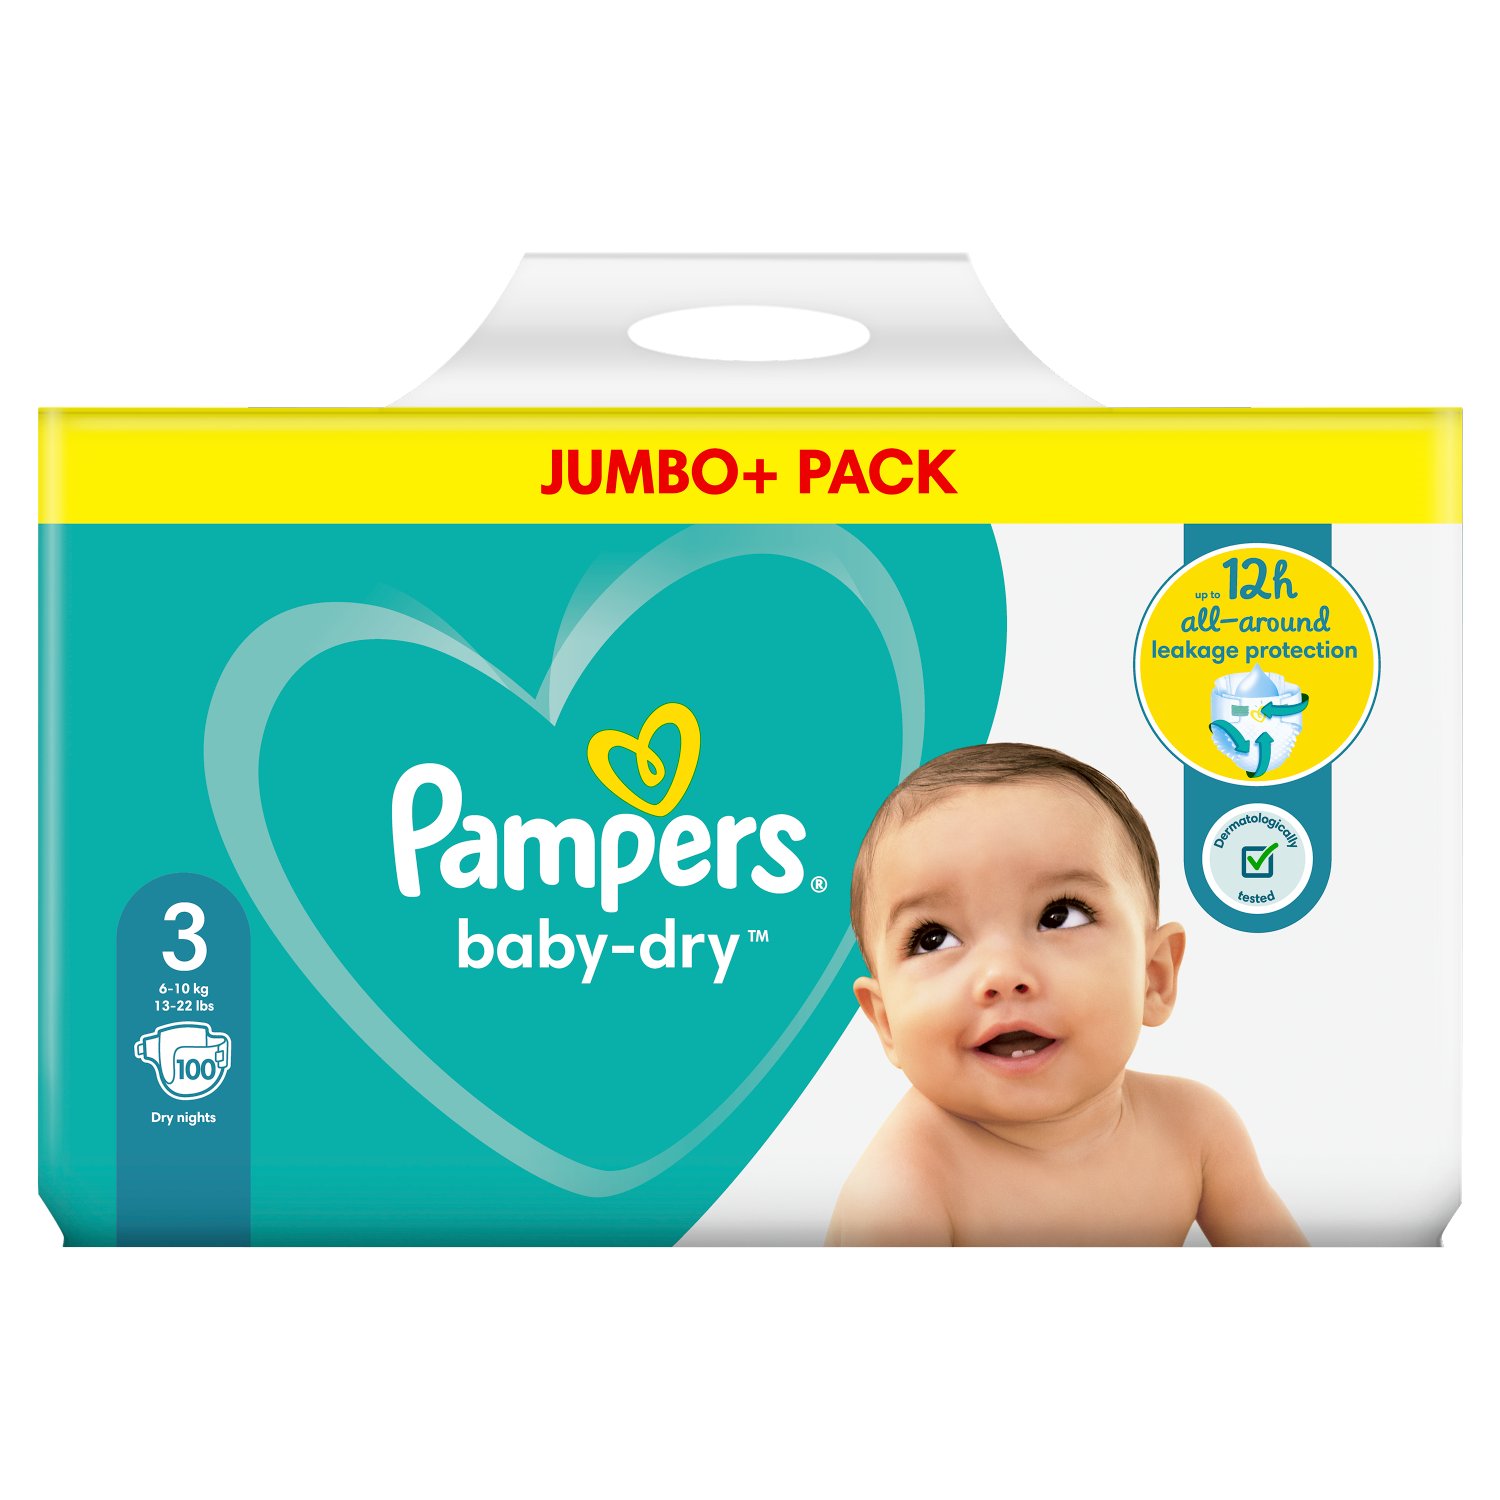 Pampers Baby-Dry Size 3 Nappies Jumbo+ Pack (100 Piece)